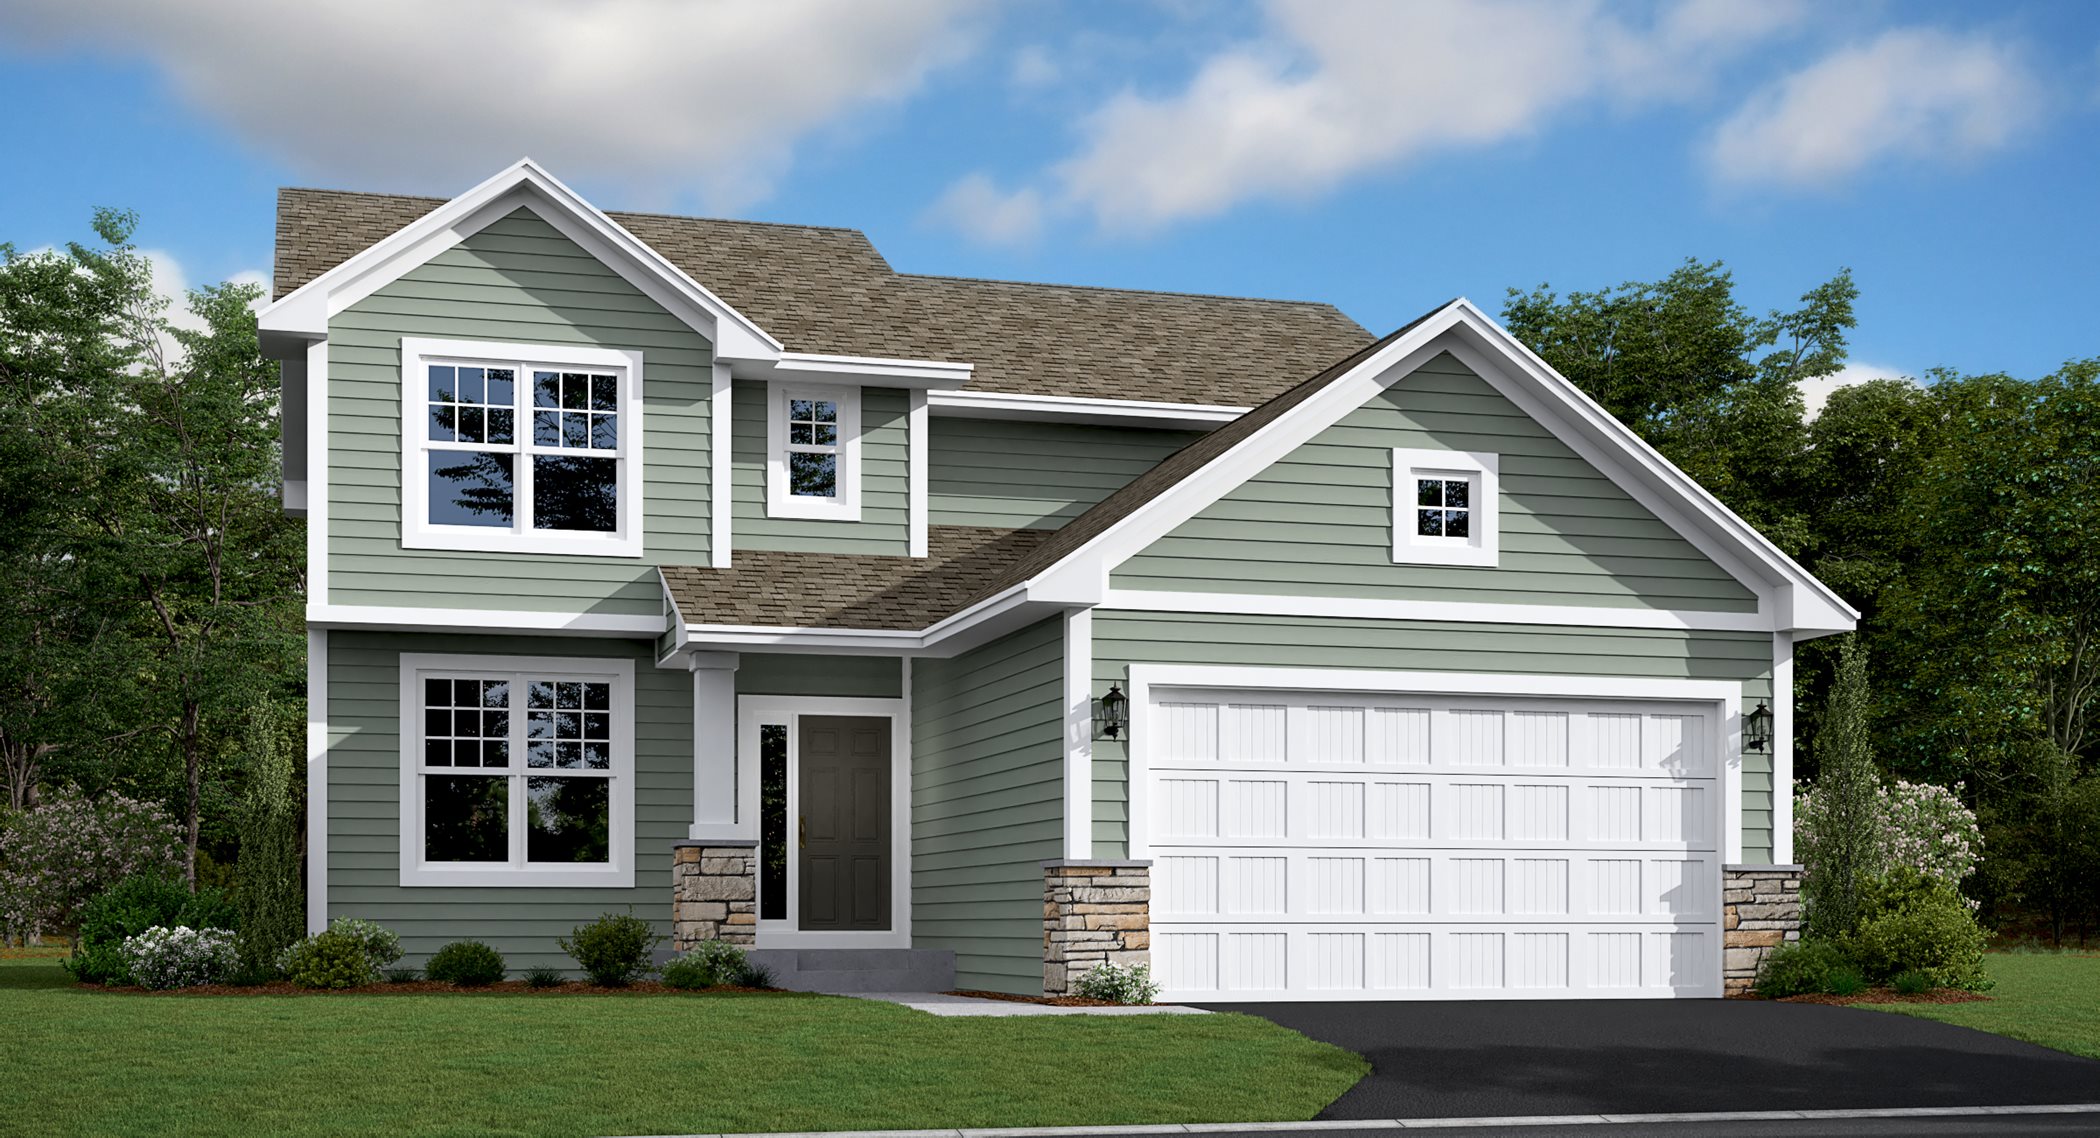 Columbus plan traditional exterior style